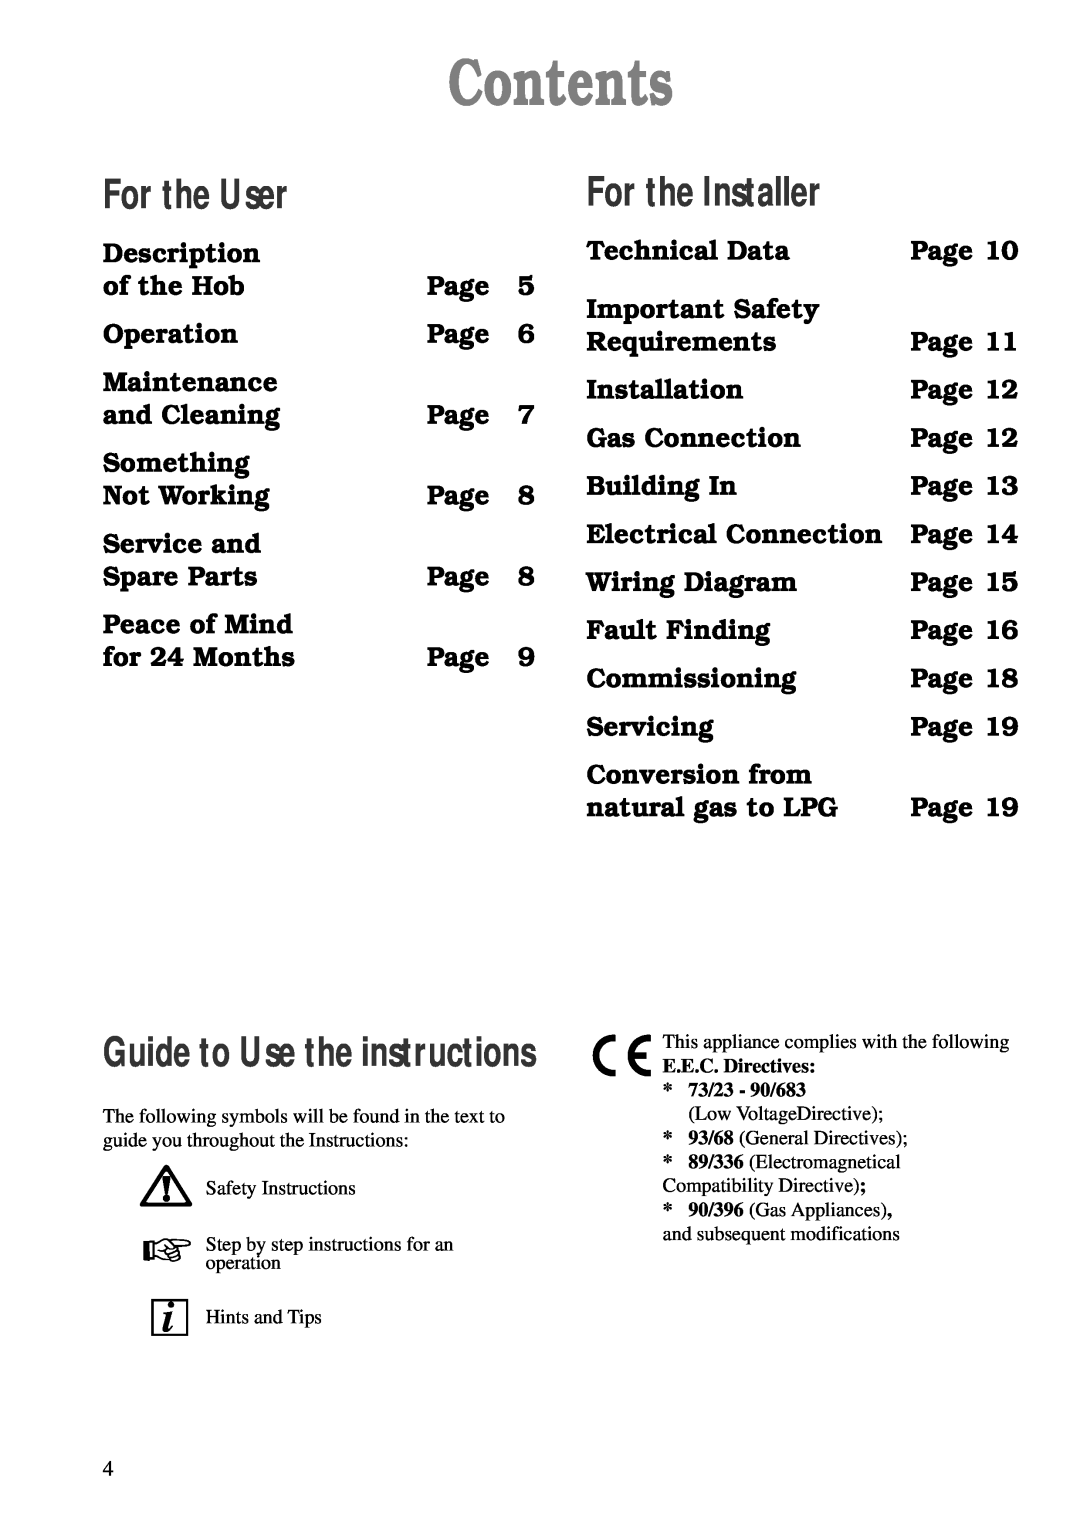 Zanussi ZGF 642 manual Contents, For the User, For the Installer, Guide to Use the instructions 